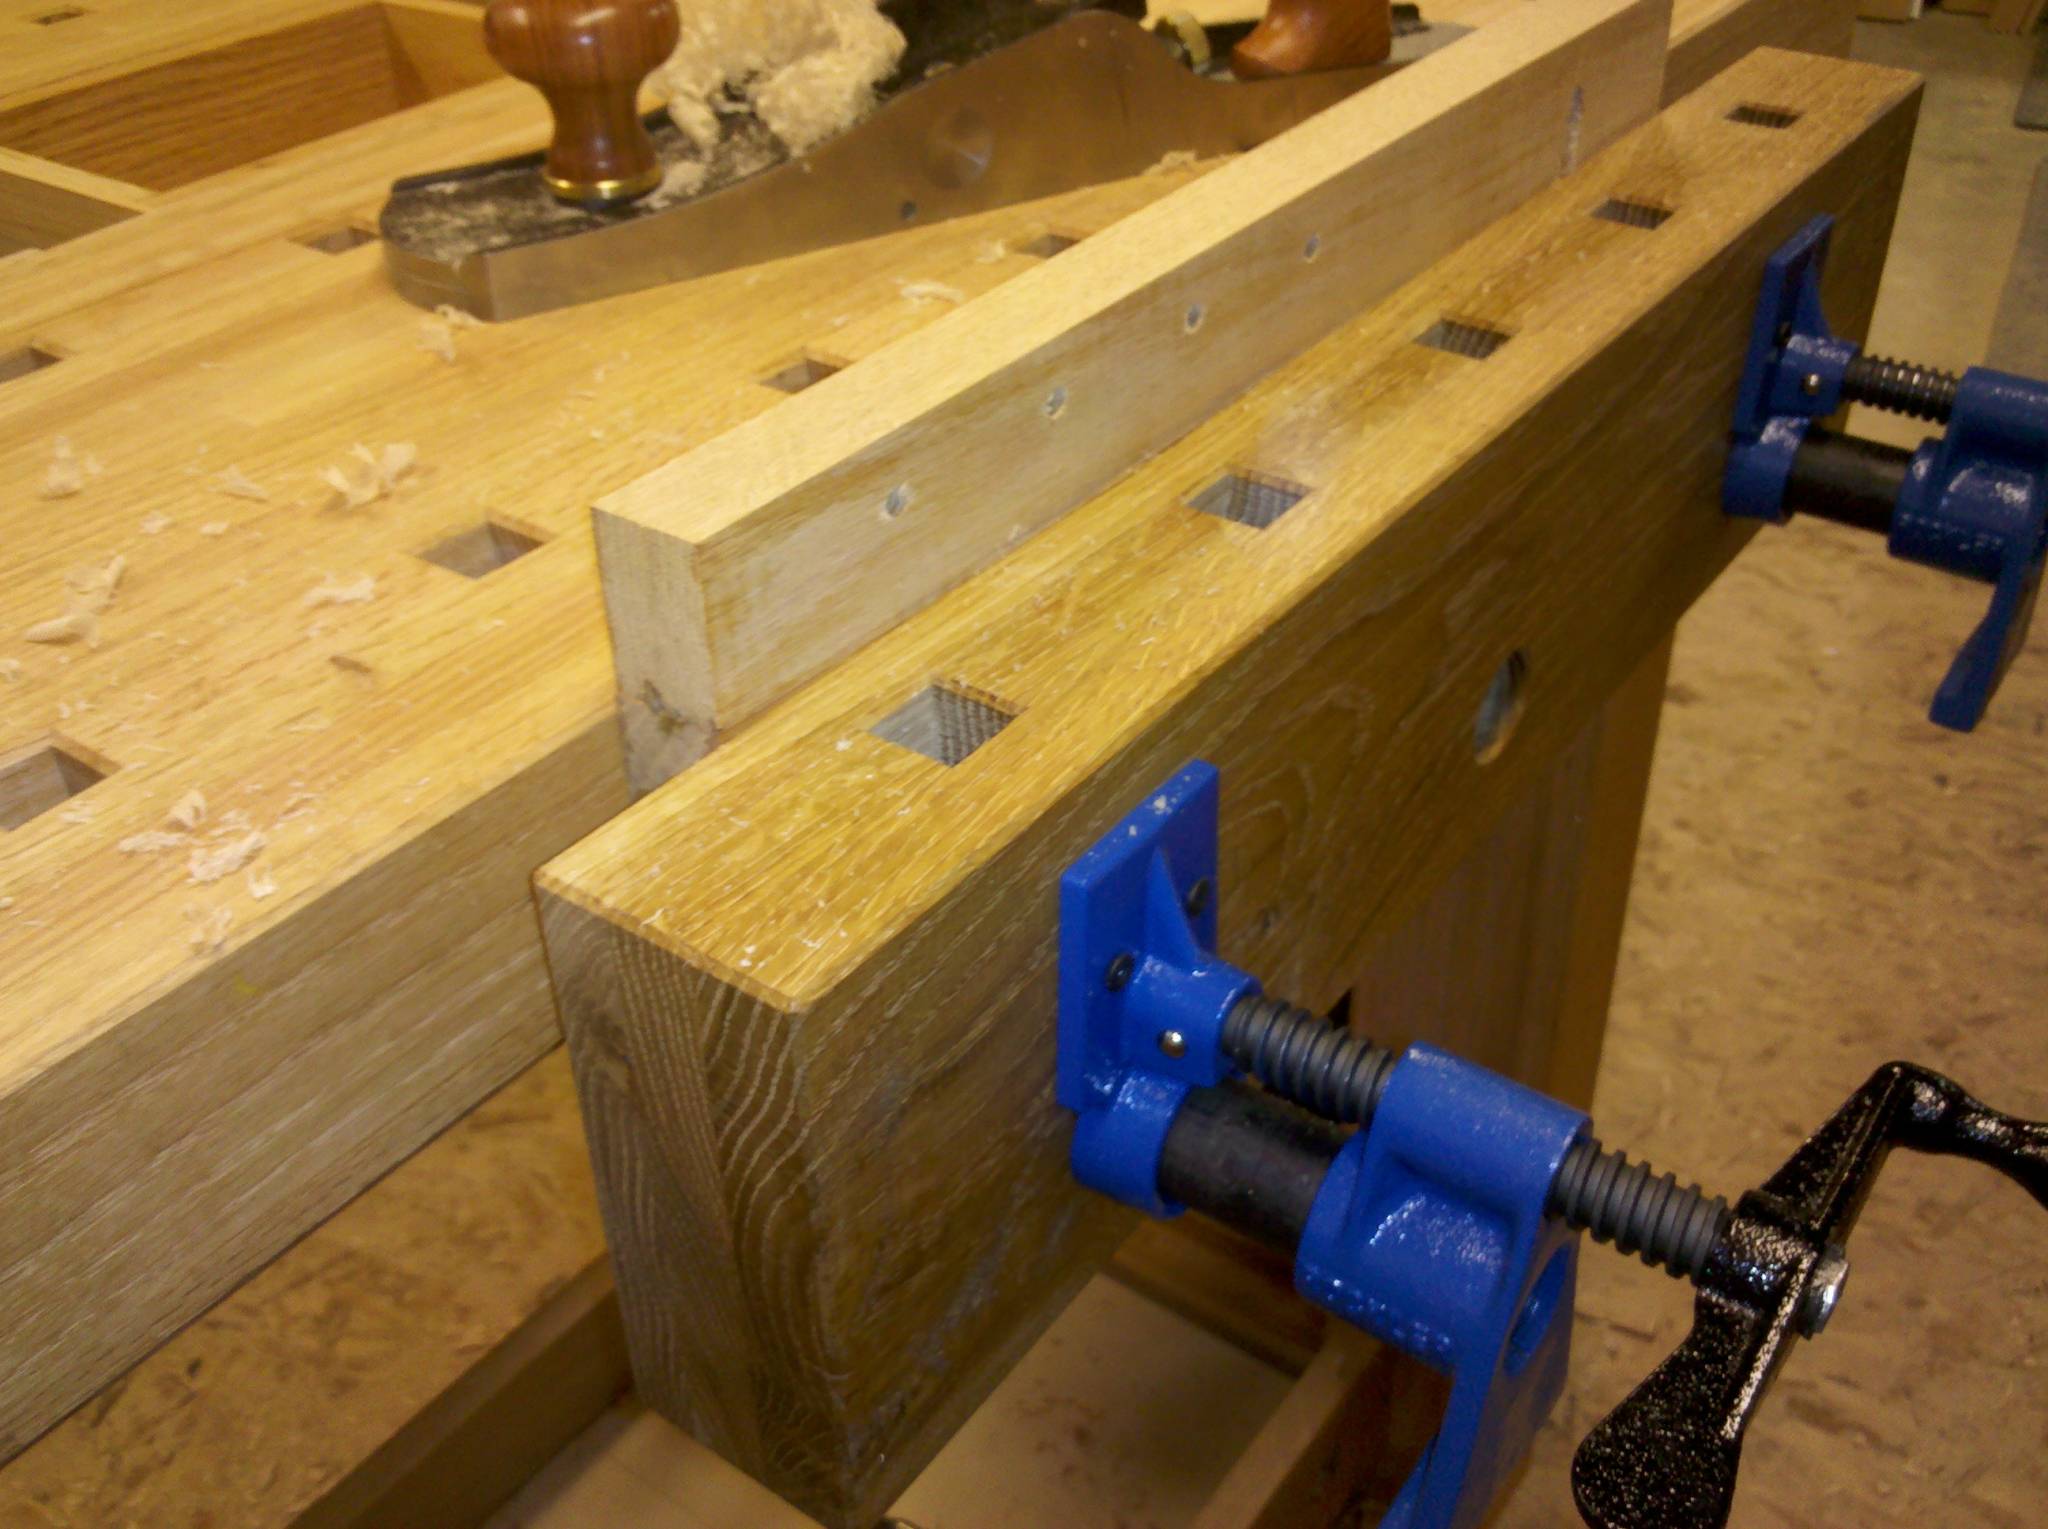 Face vice built with pipe clamps